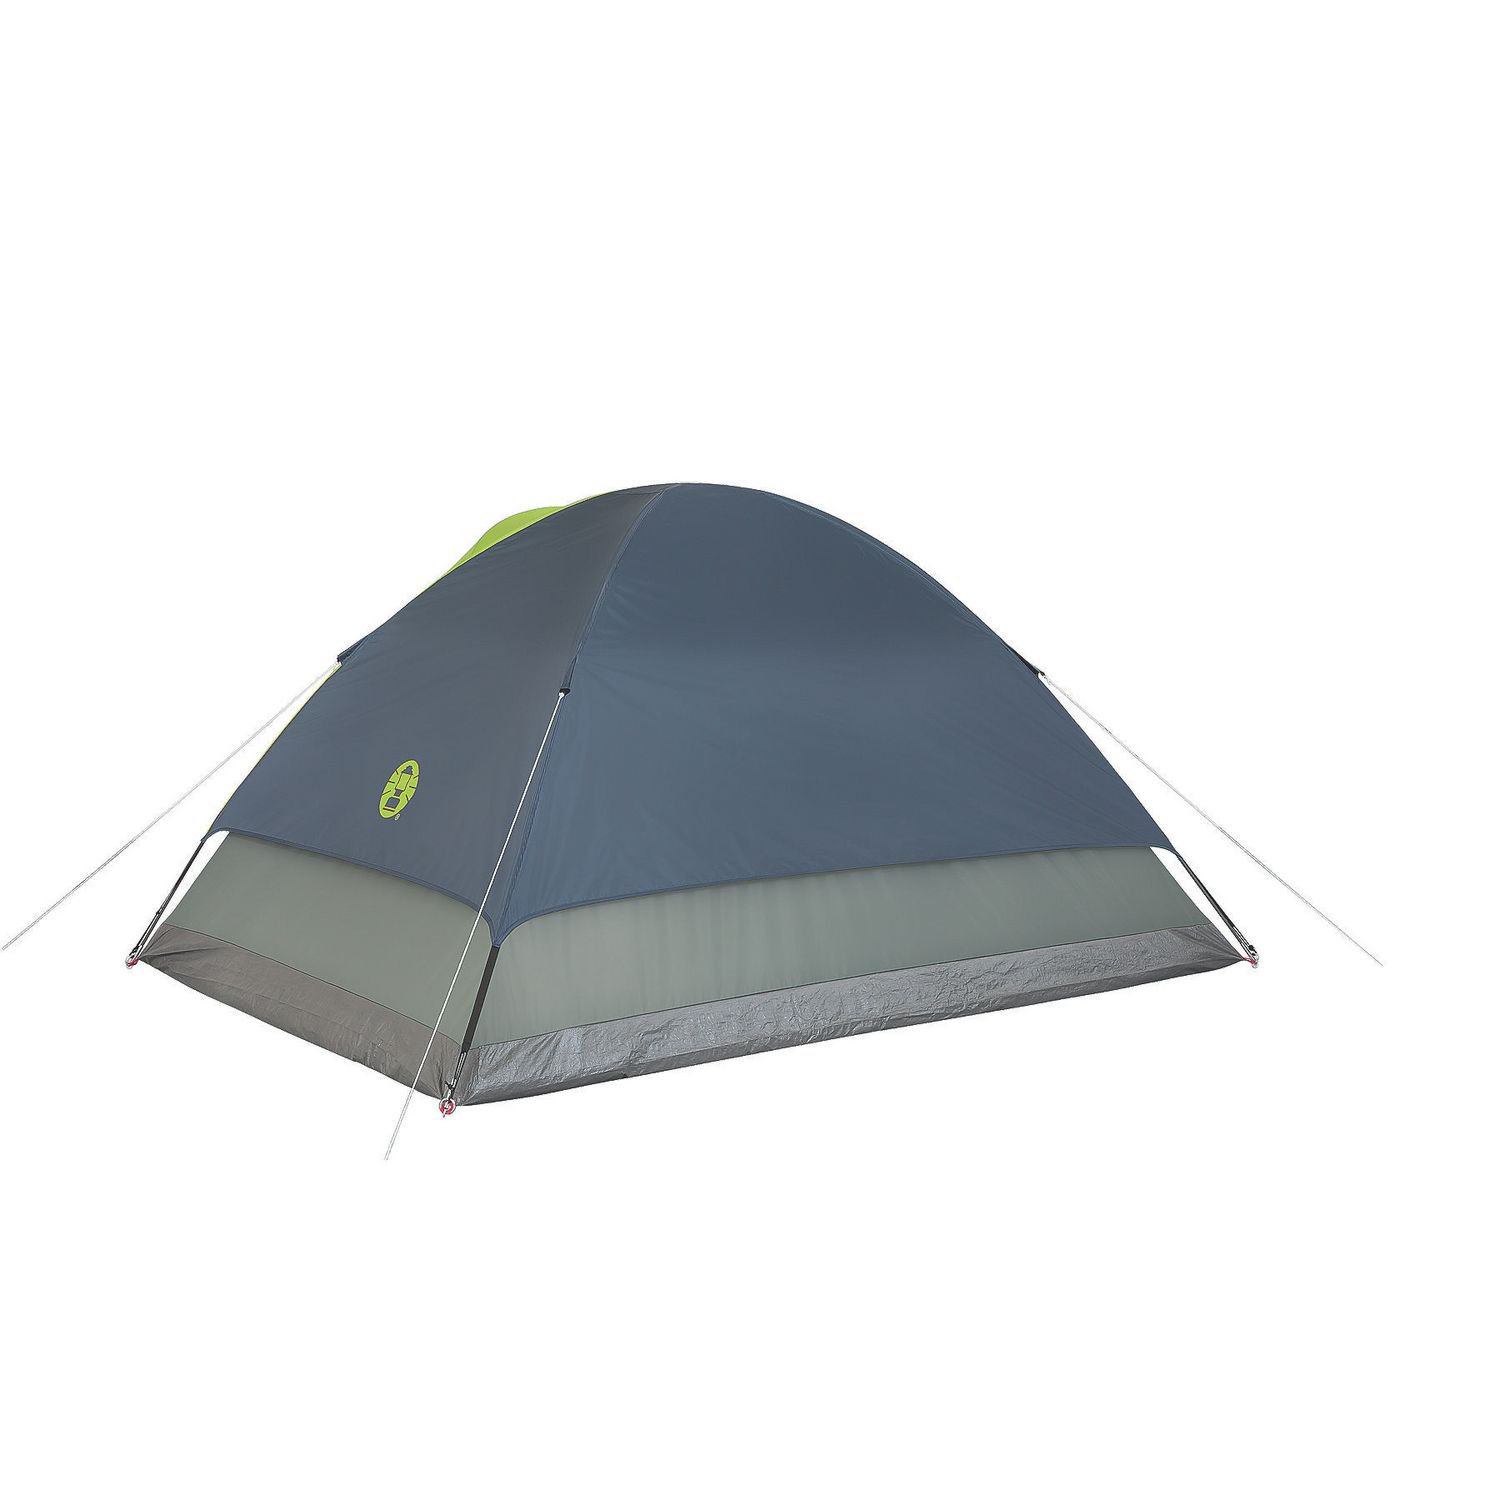 Ozark Trail 10-Person Family Dome Tent, Family dome tent - 10 people. 